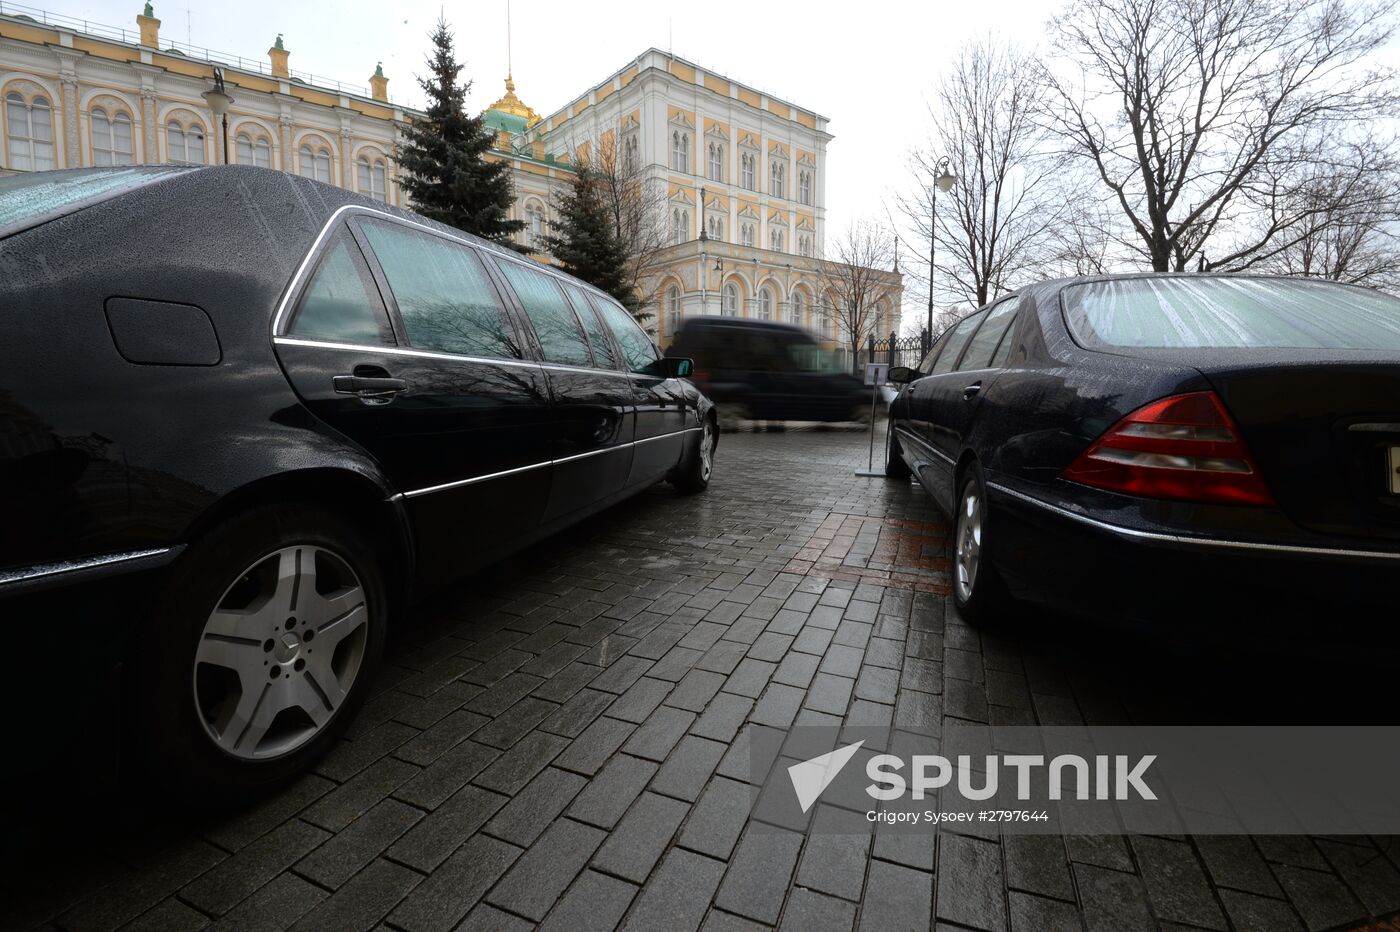 Federal Guard Service cars displayed in the Kremlin